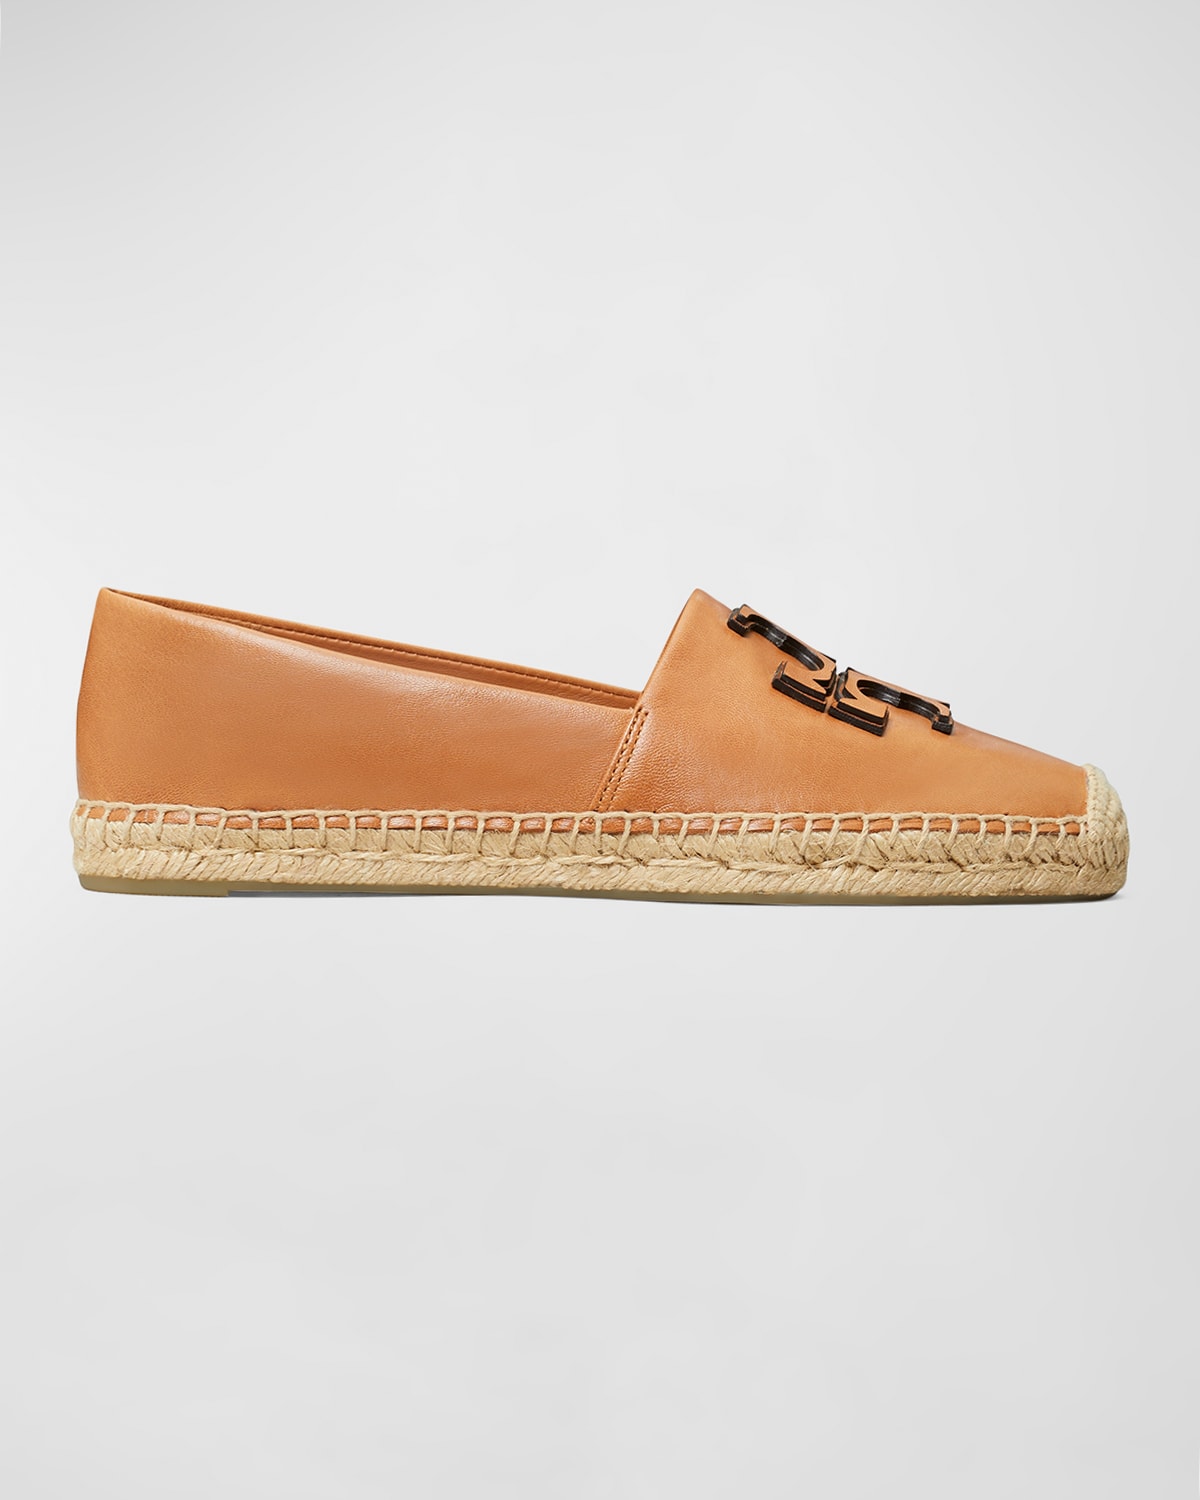 Tory Burch Ines Leather Double T Espadrilles In Tan